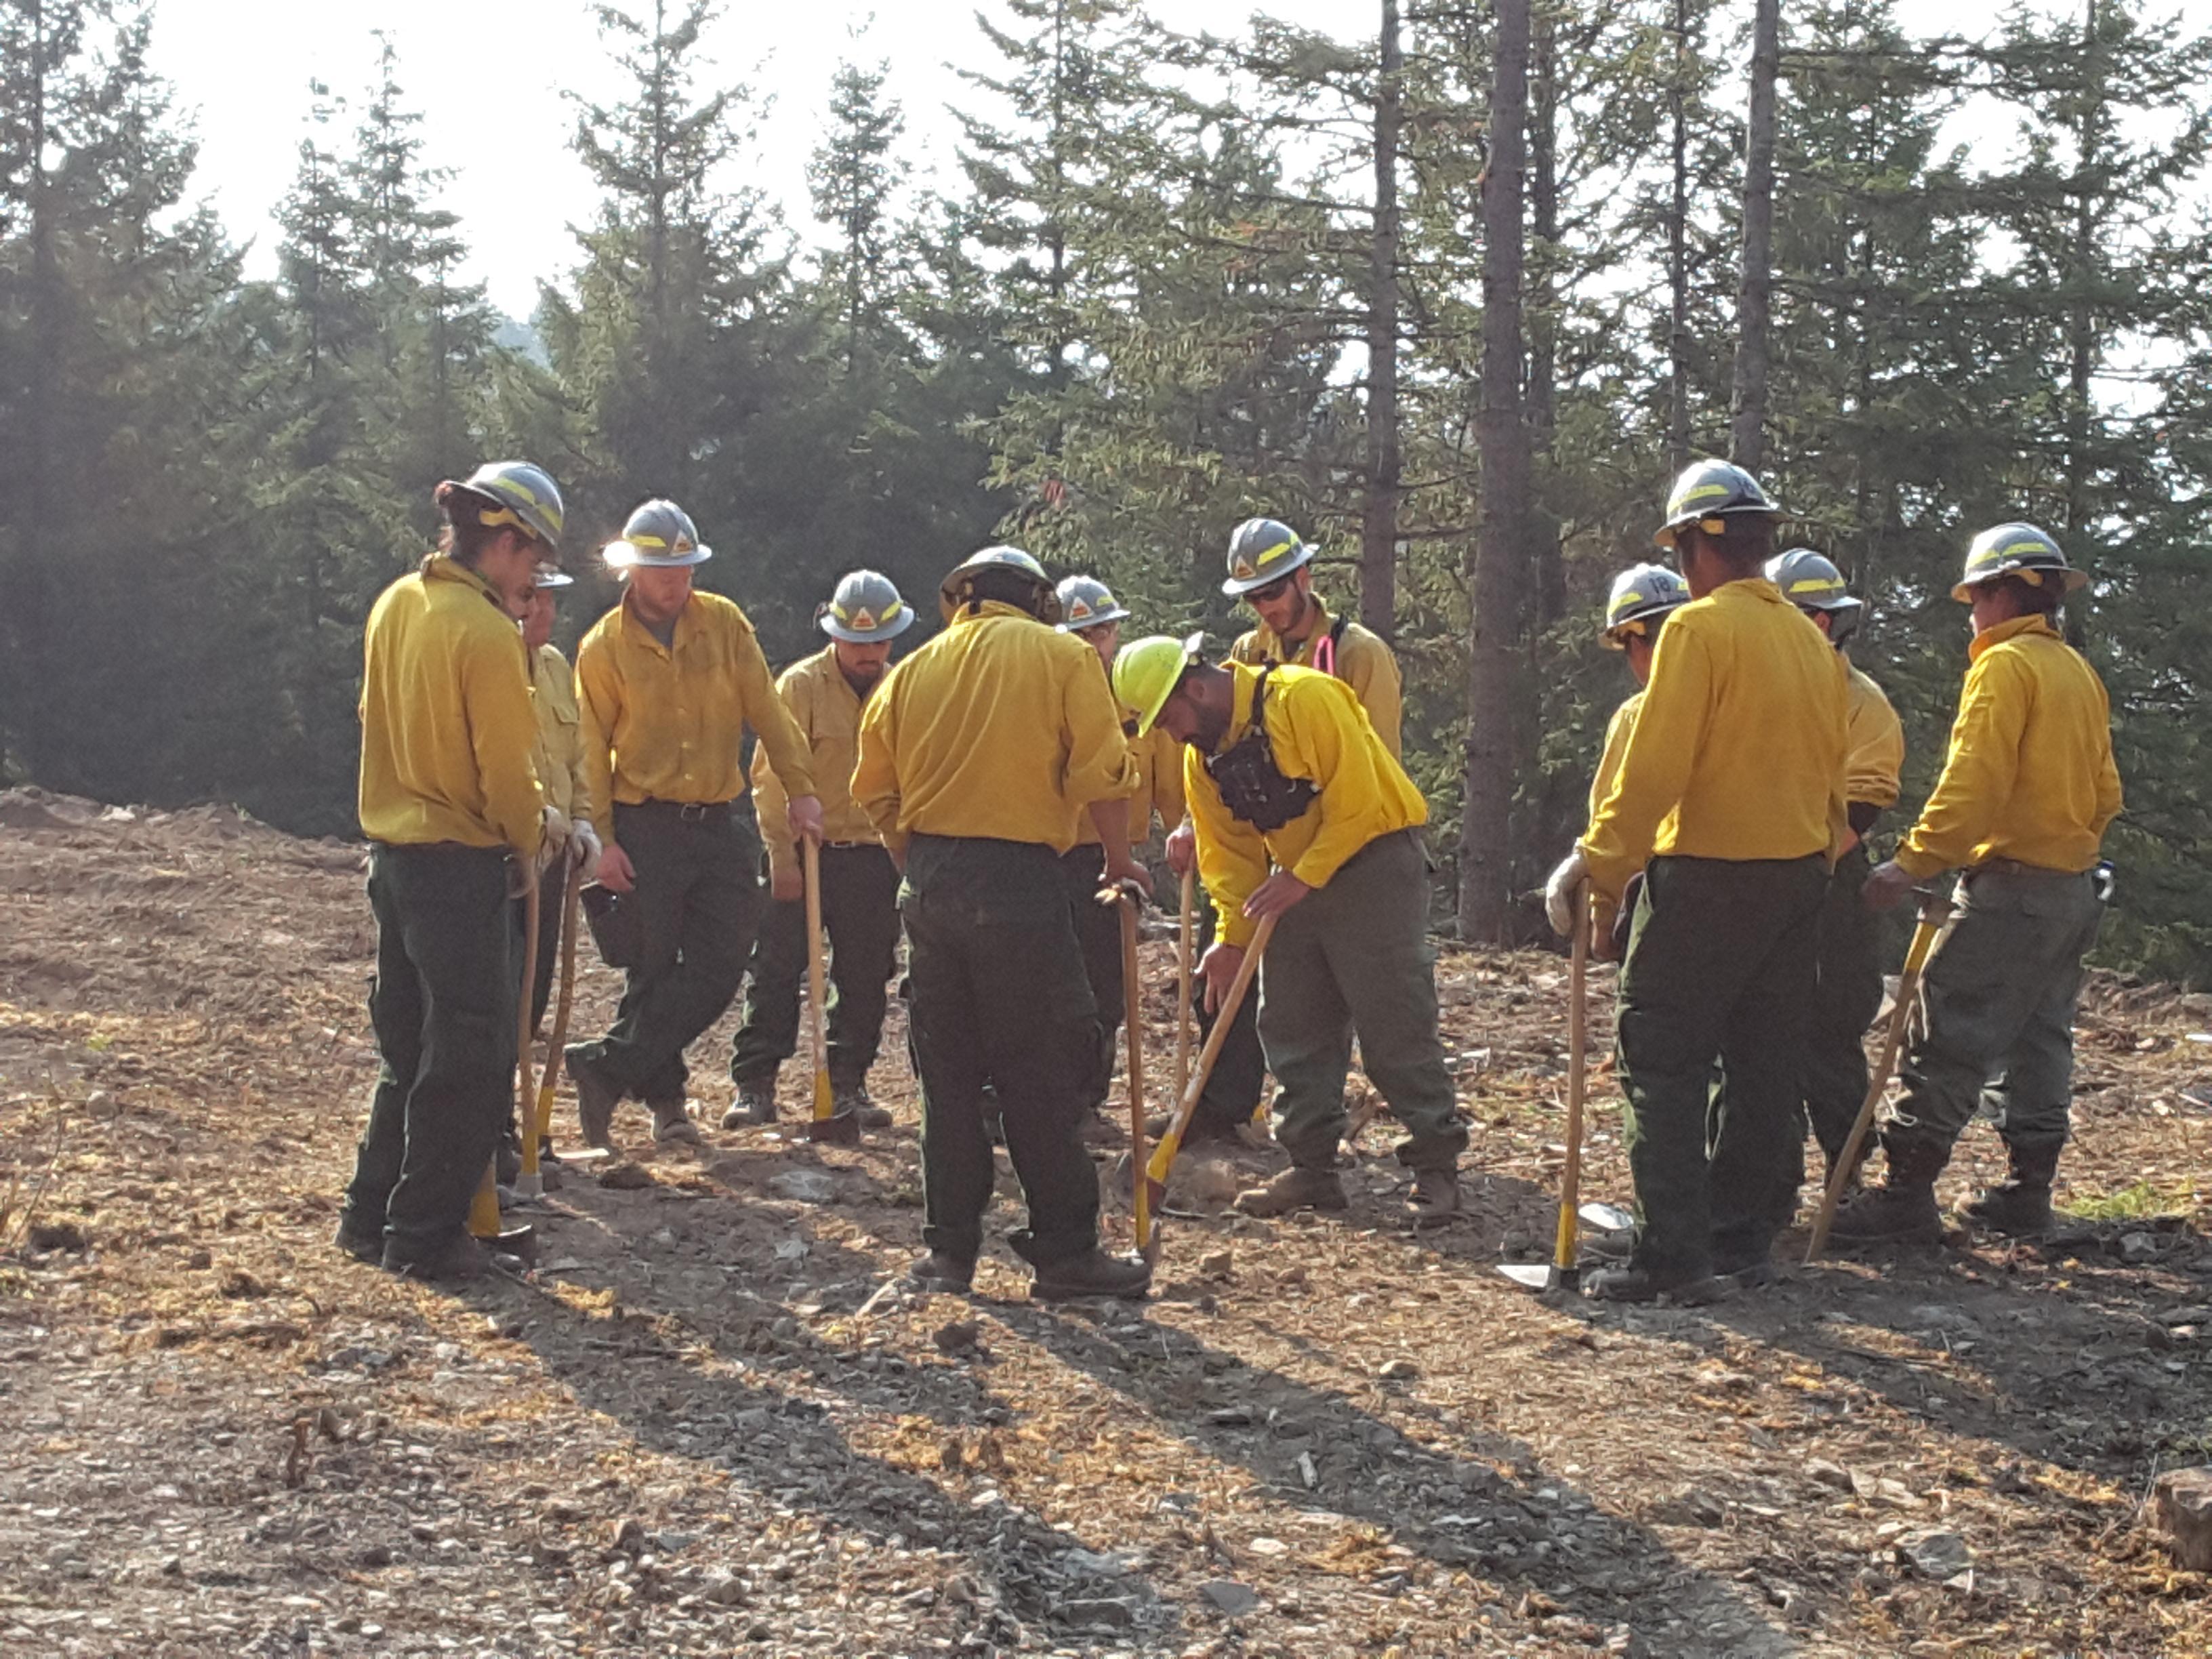 A crew of firefighters are gathered in a circle in a cleared area. Their Crew Boss is demonstrating how to use tools correctly to train newer crew members.